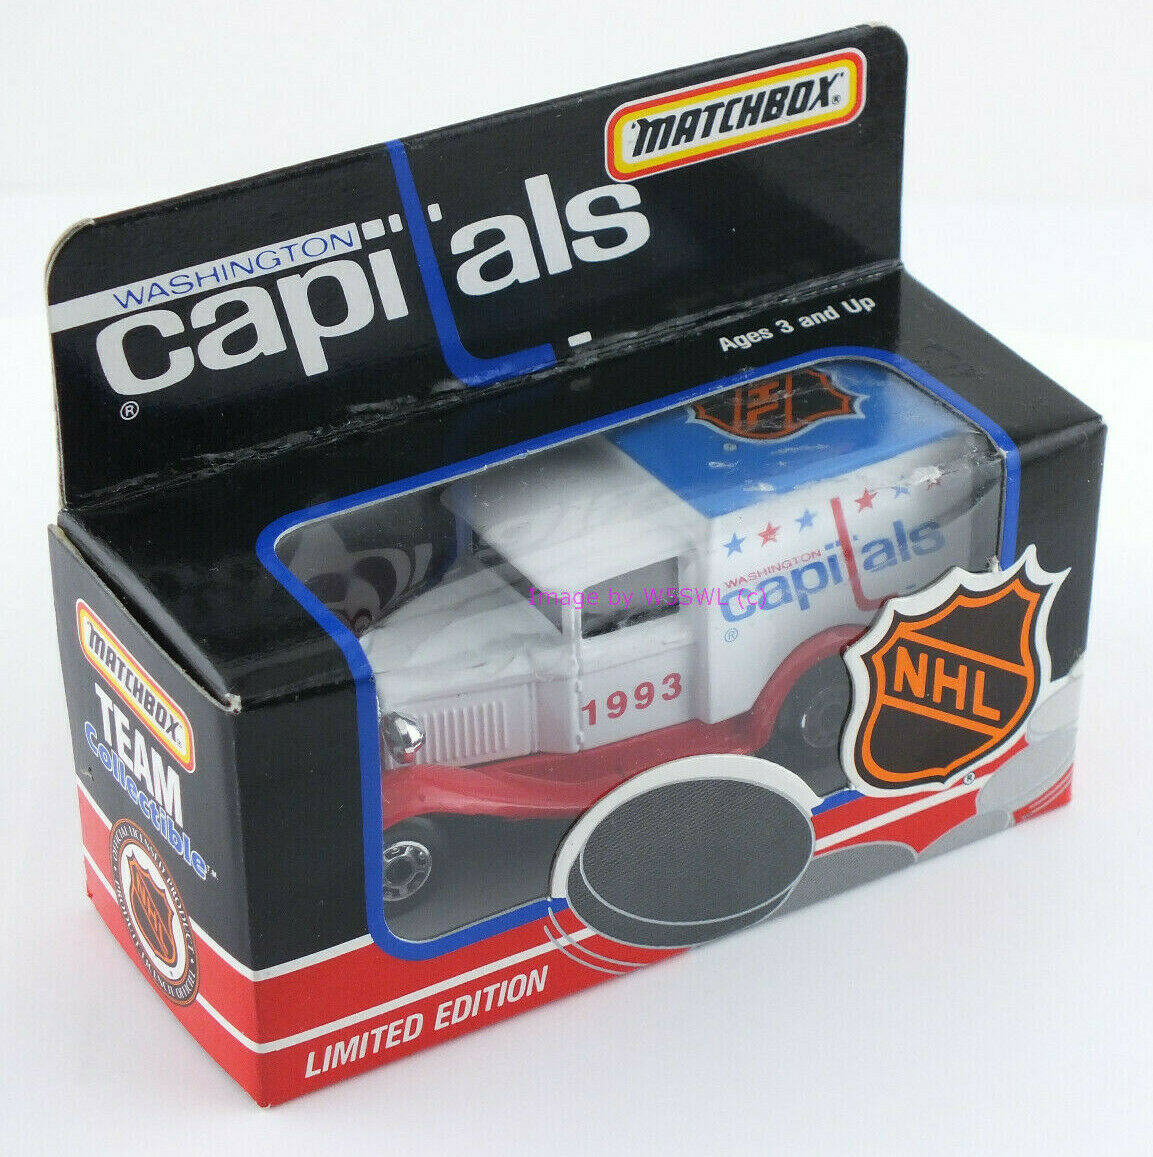 Matchbox White Rose NHL Team Washington Capials 1993 Delivery Van Truck - Dave's Hobby Shop by W5SWL